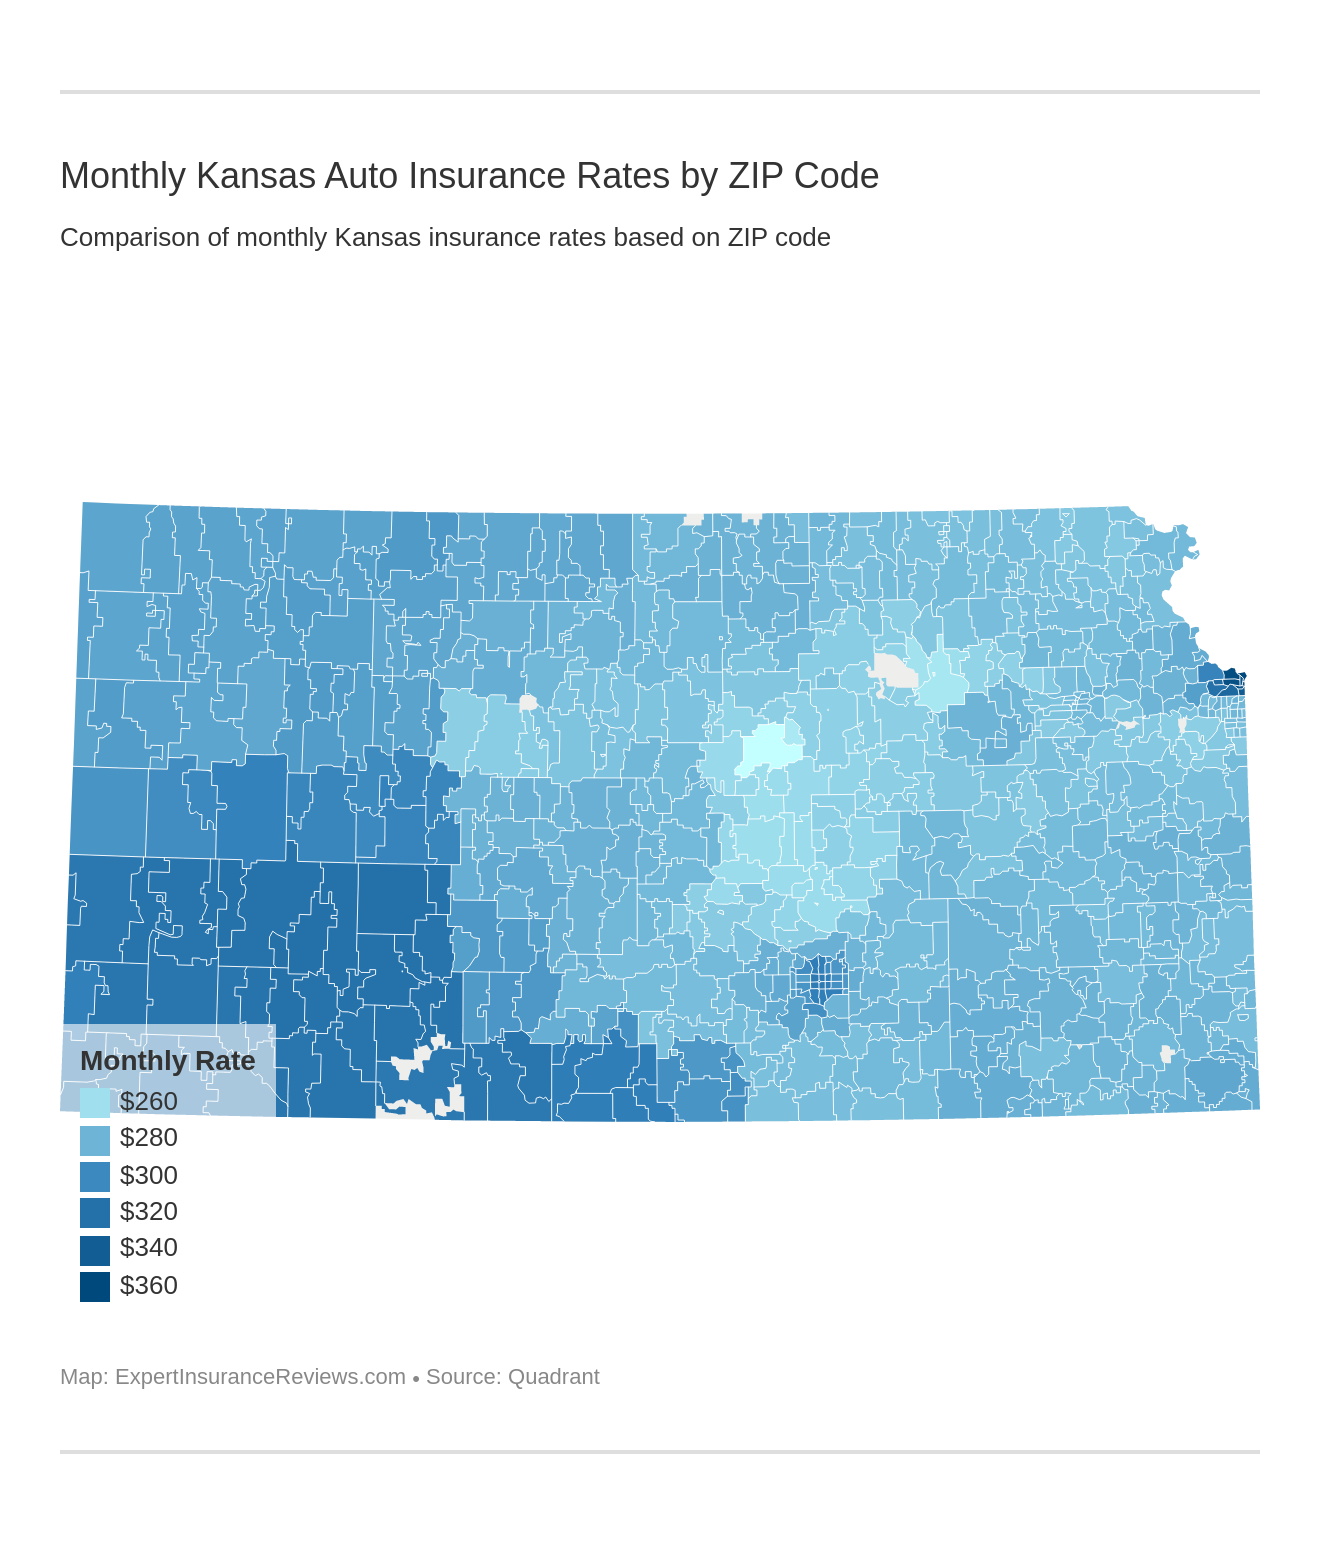 Monthly Kansas Auto Insurance Rates by ZIP Code